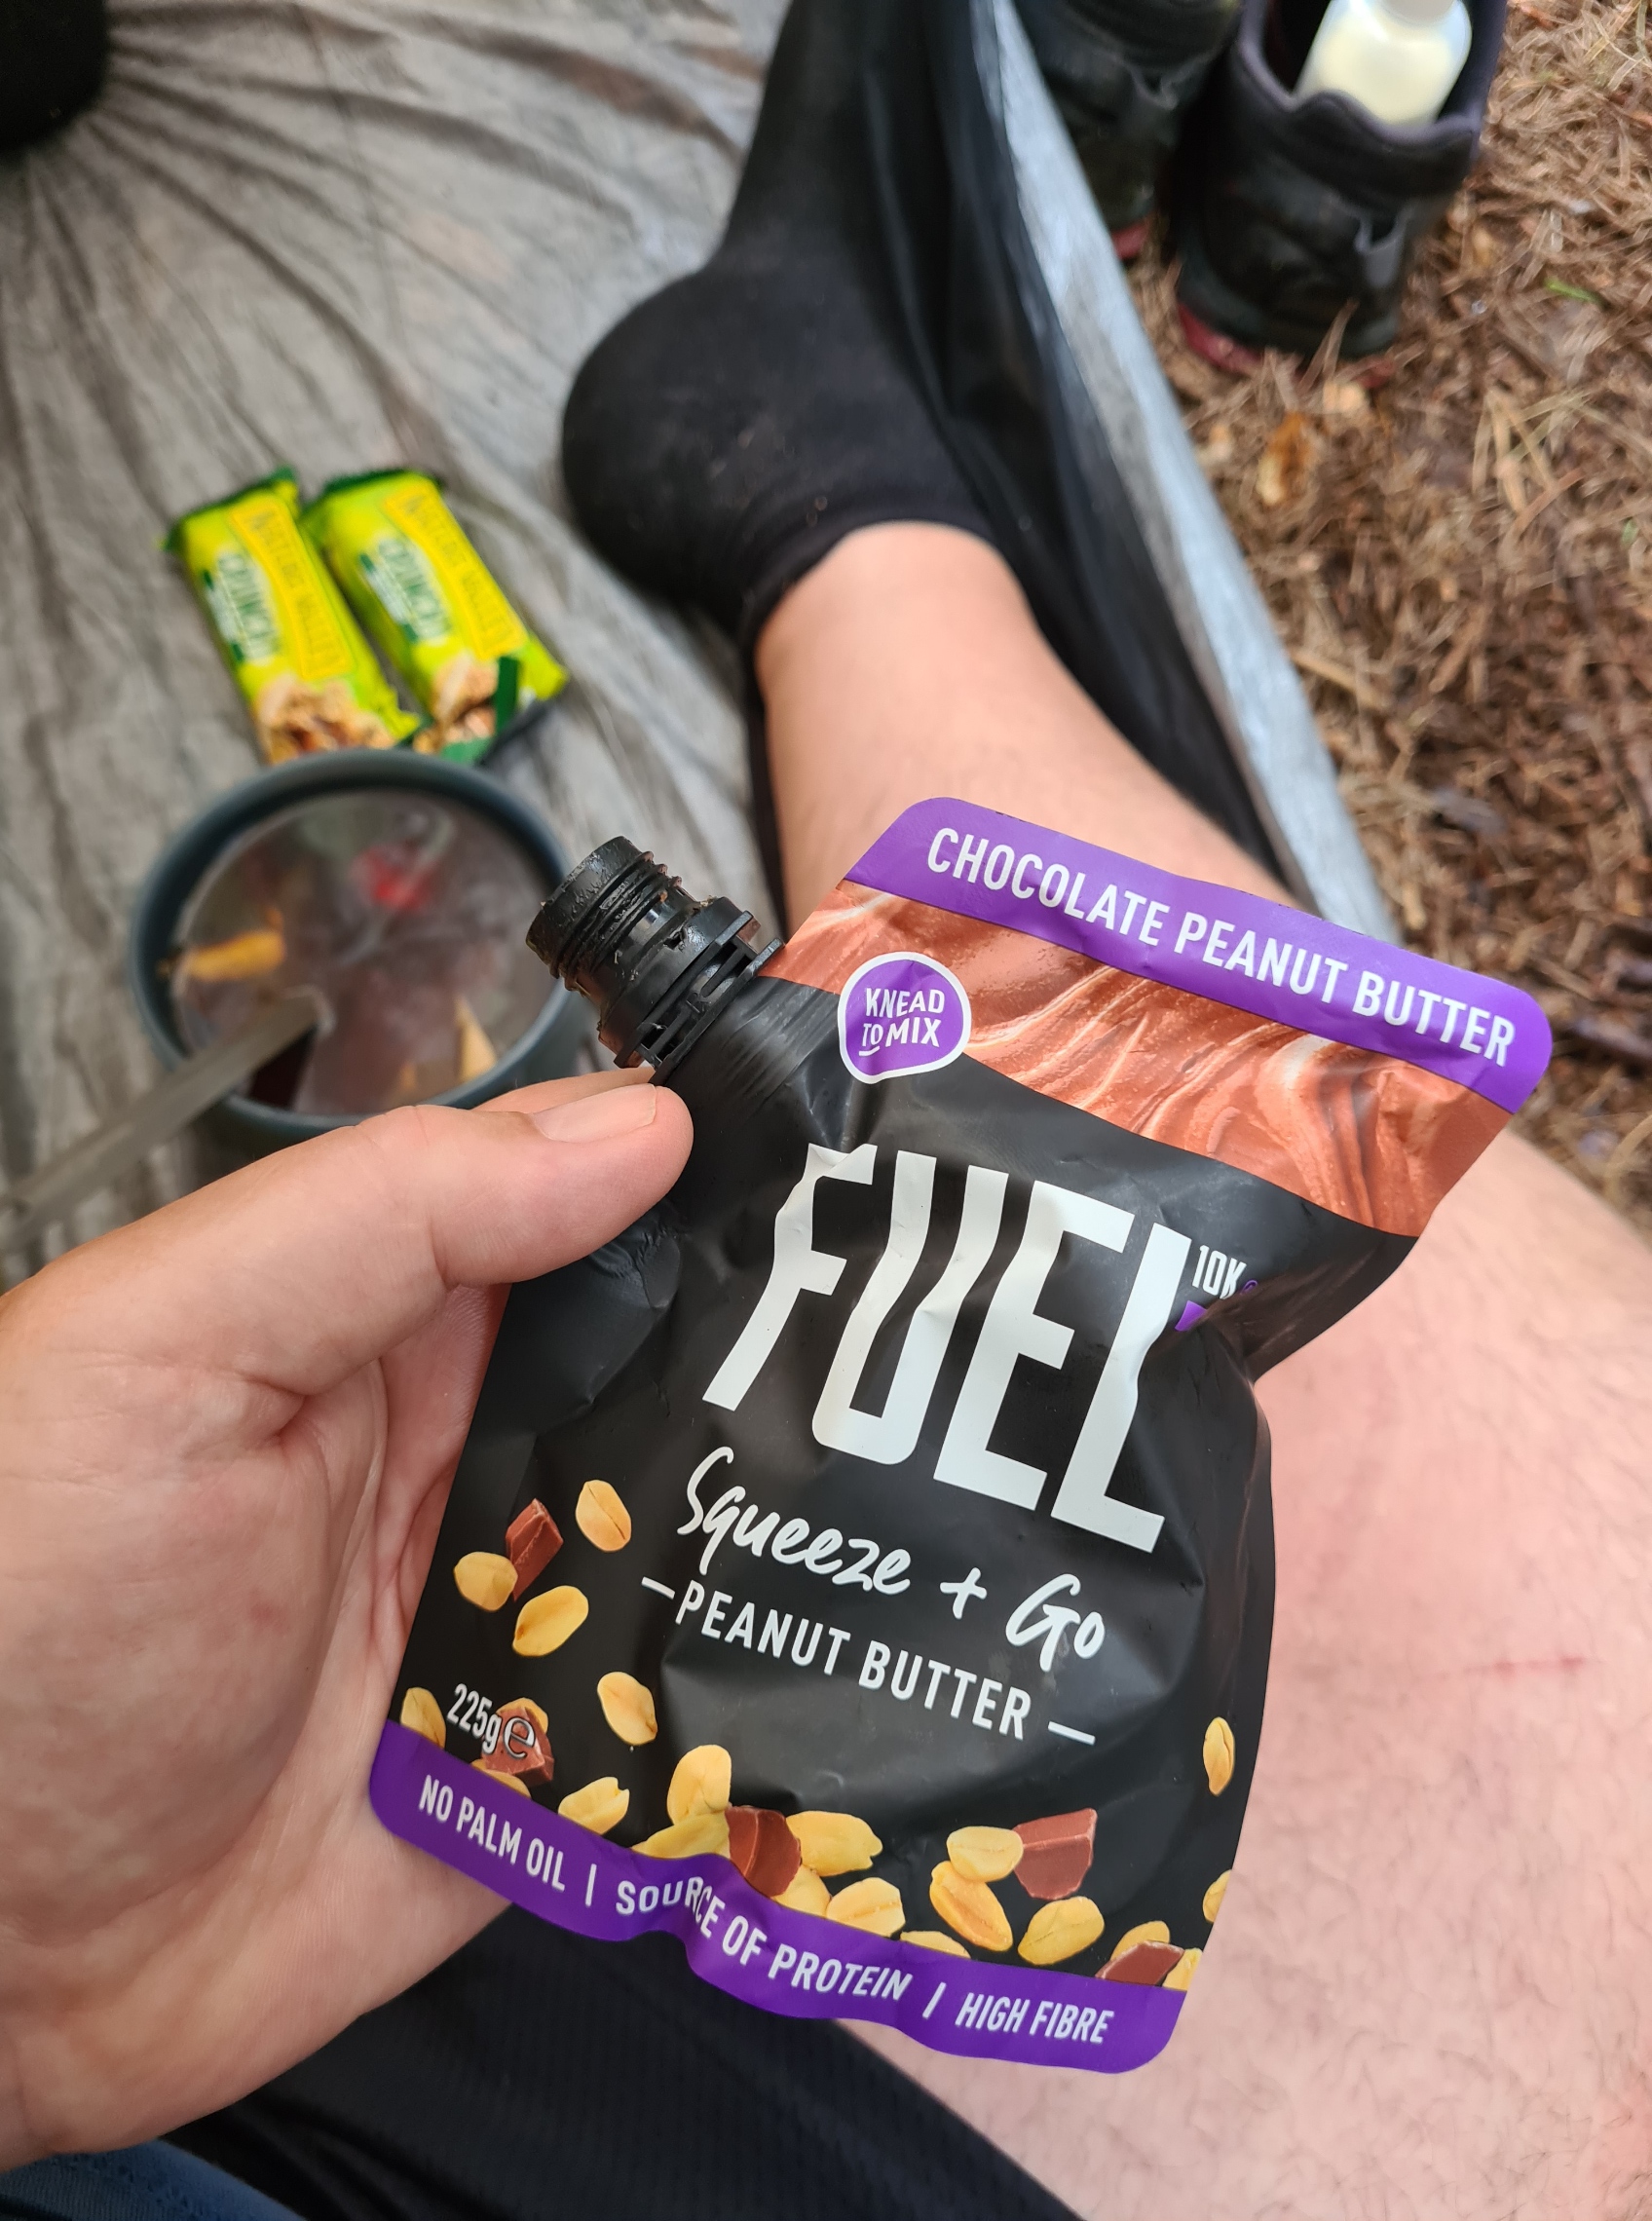 Despite not being able to stomach breakfast first thing most mornings on trail. I try and have a few squirts of peanut butter straight into the mouth to start the calorie uplift